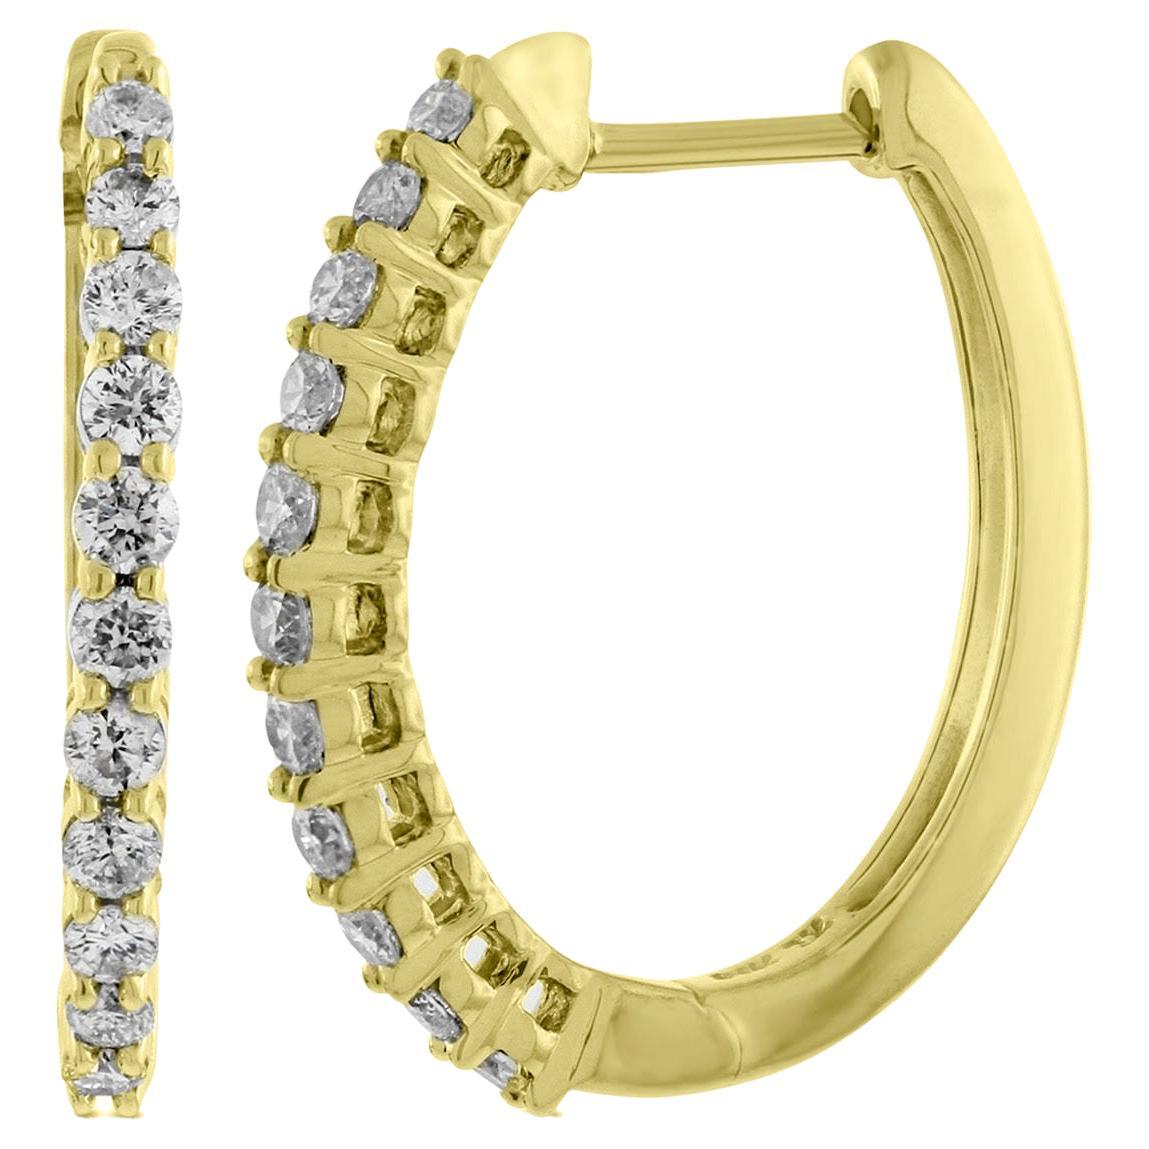 .25 Carat Total Weight Diamond Outside Round Hoop Earrings in 14K Yellow Gold